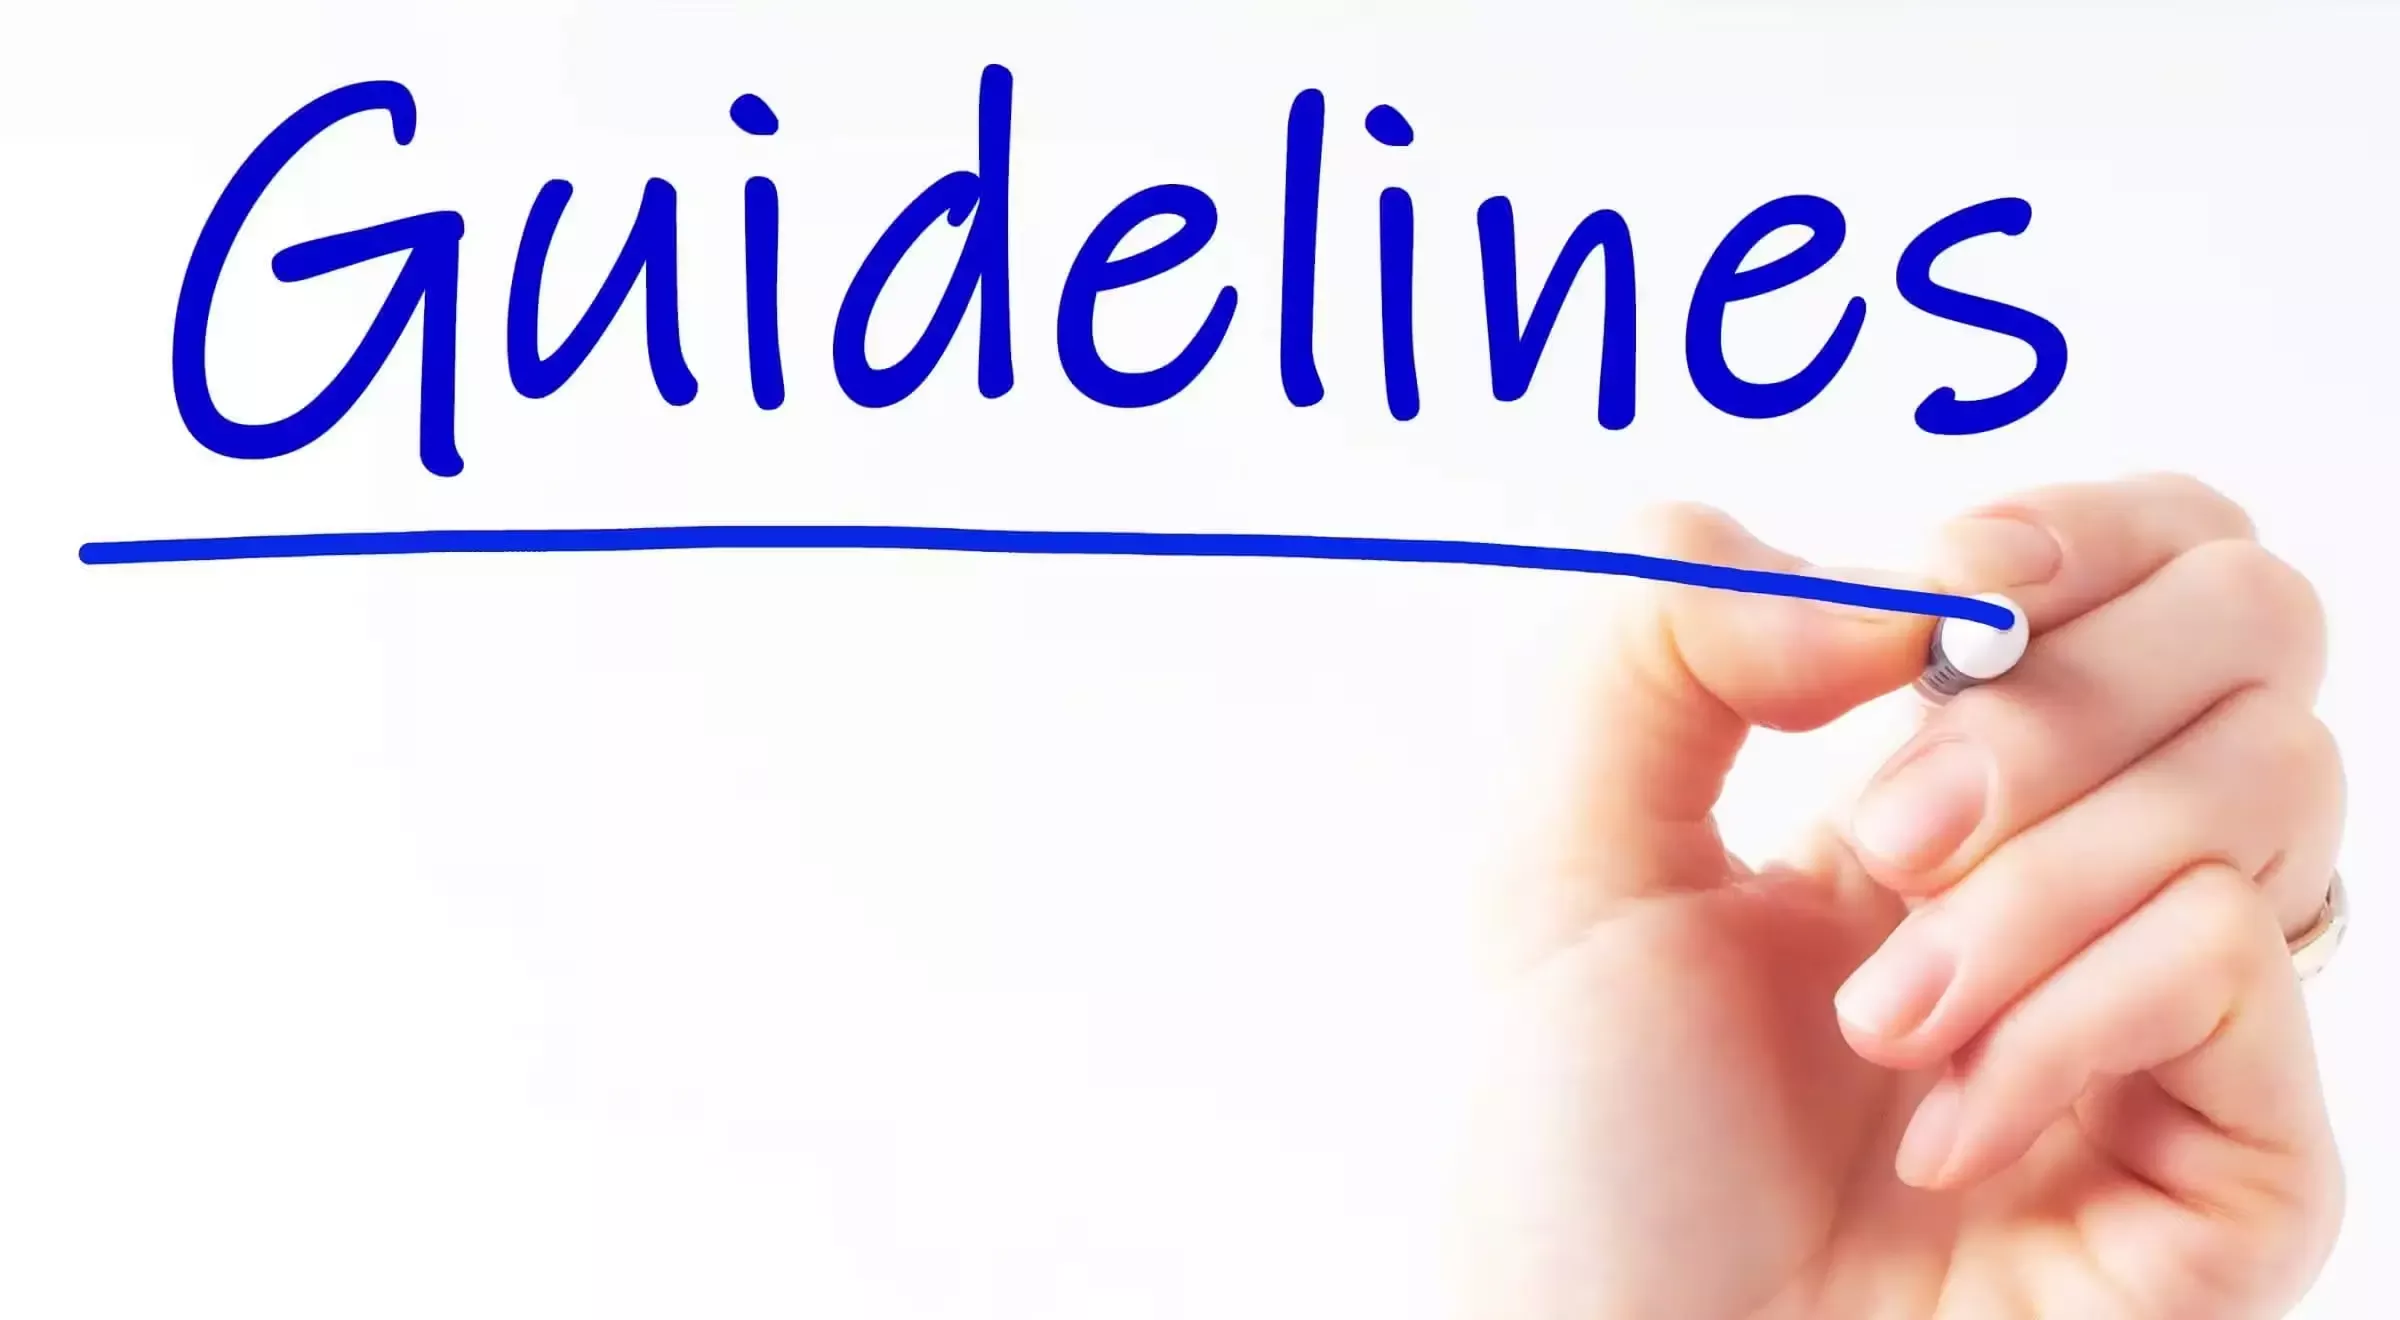 A hand writing the word Guildeline